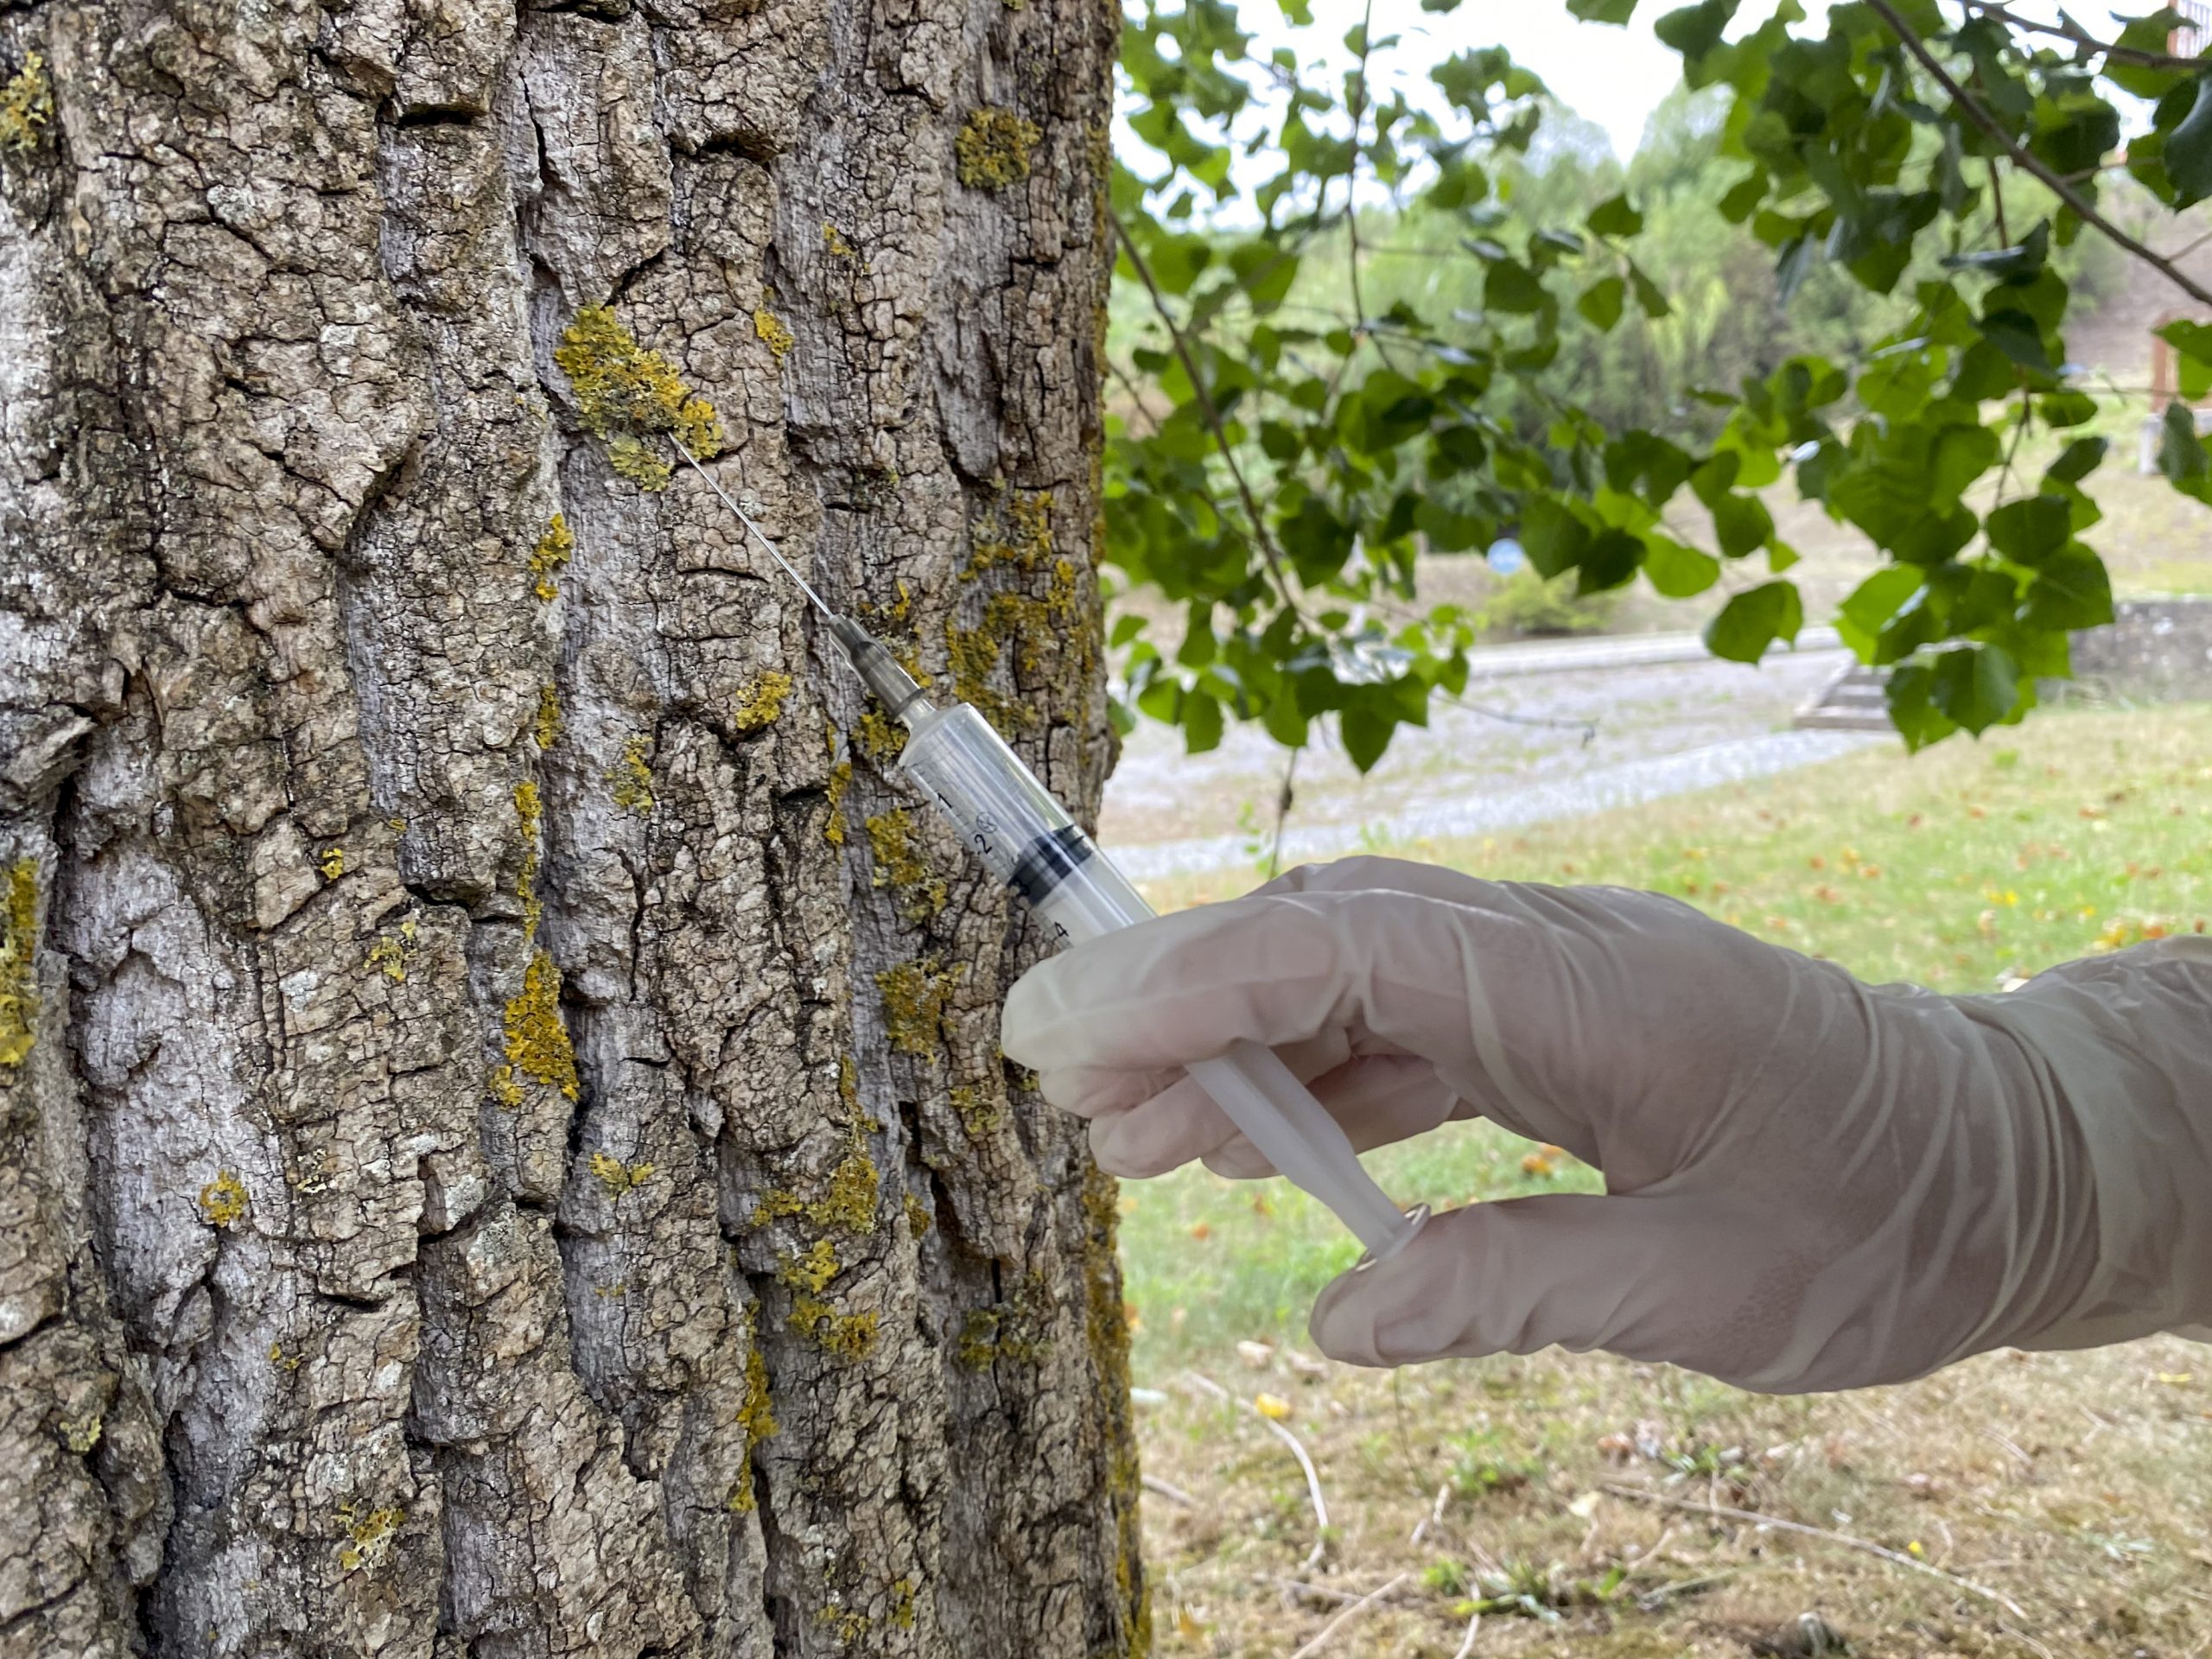 hand in a glove injecting fungicide into tree bark and trunk 